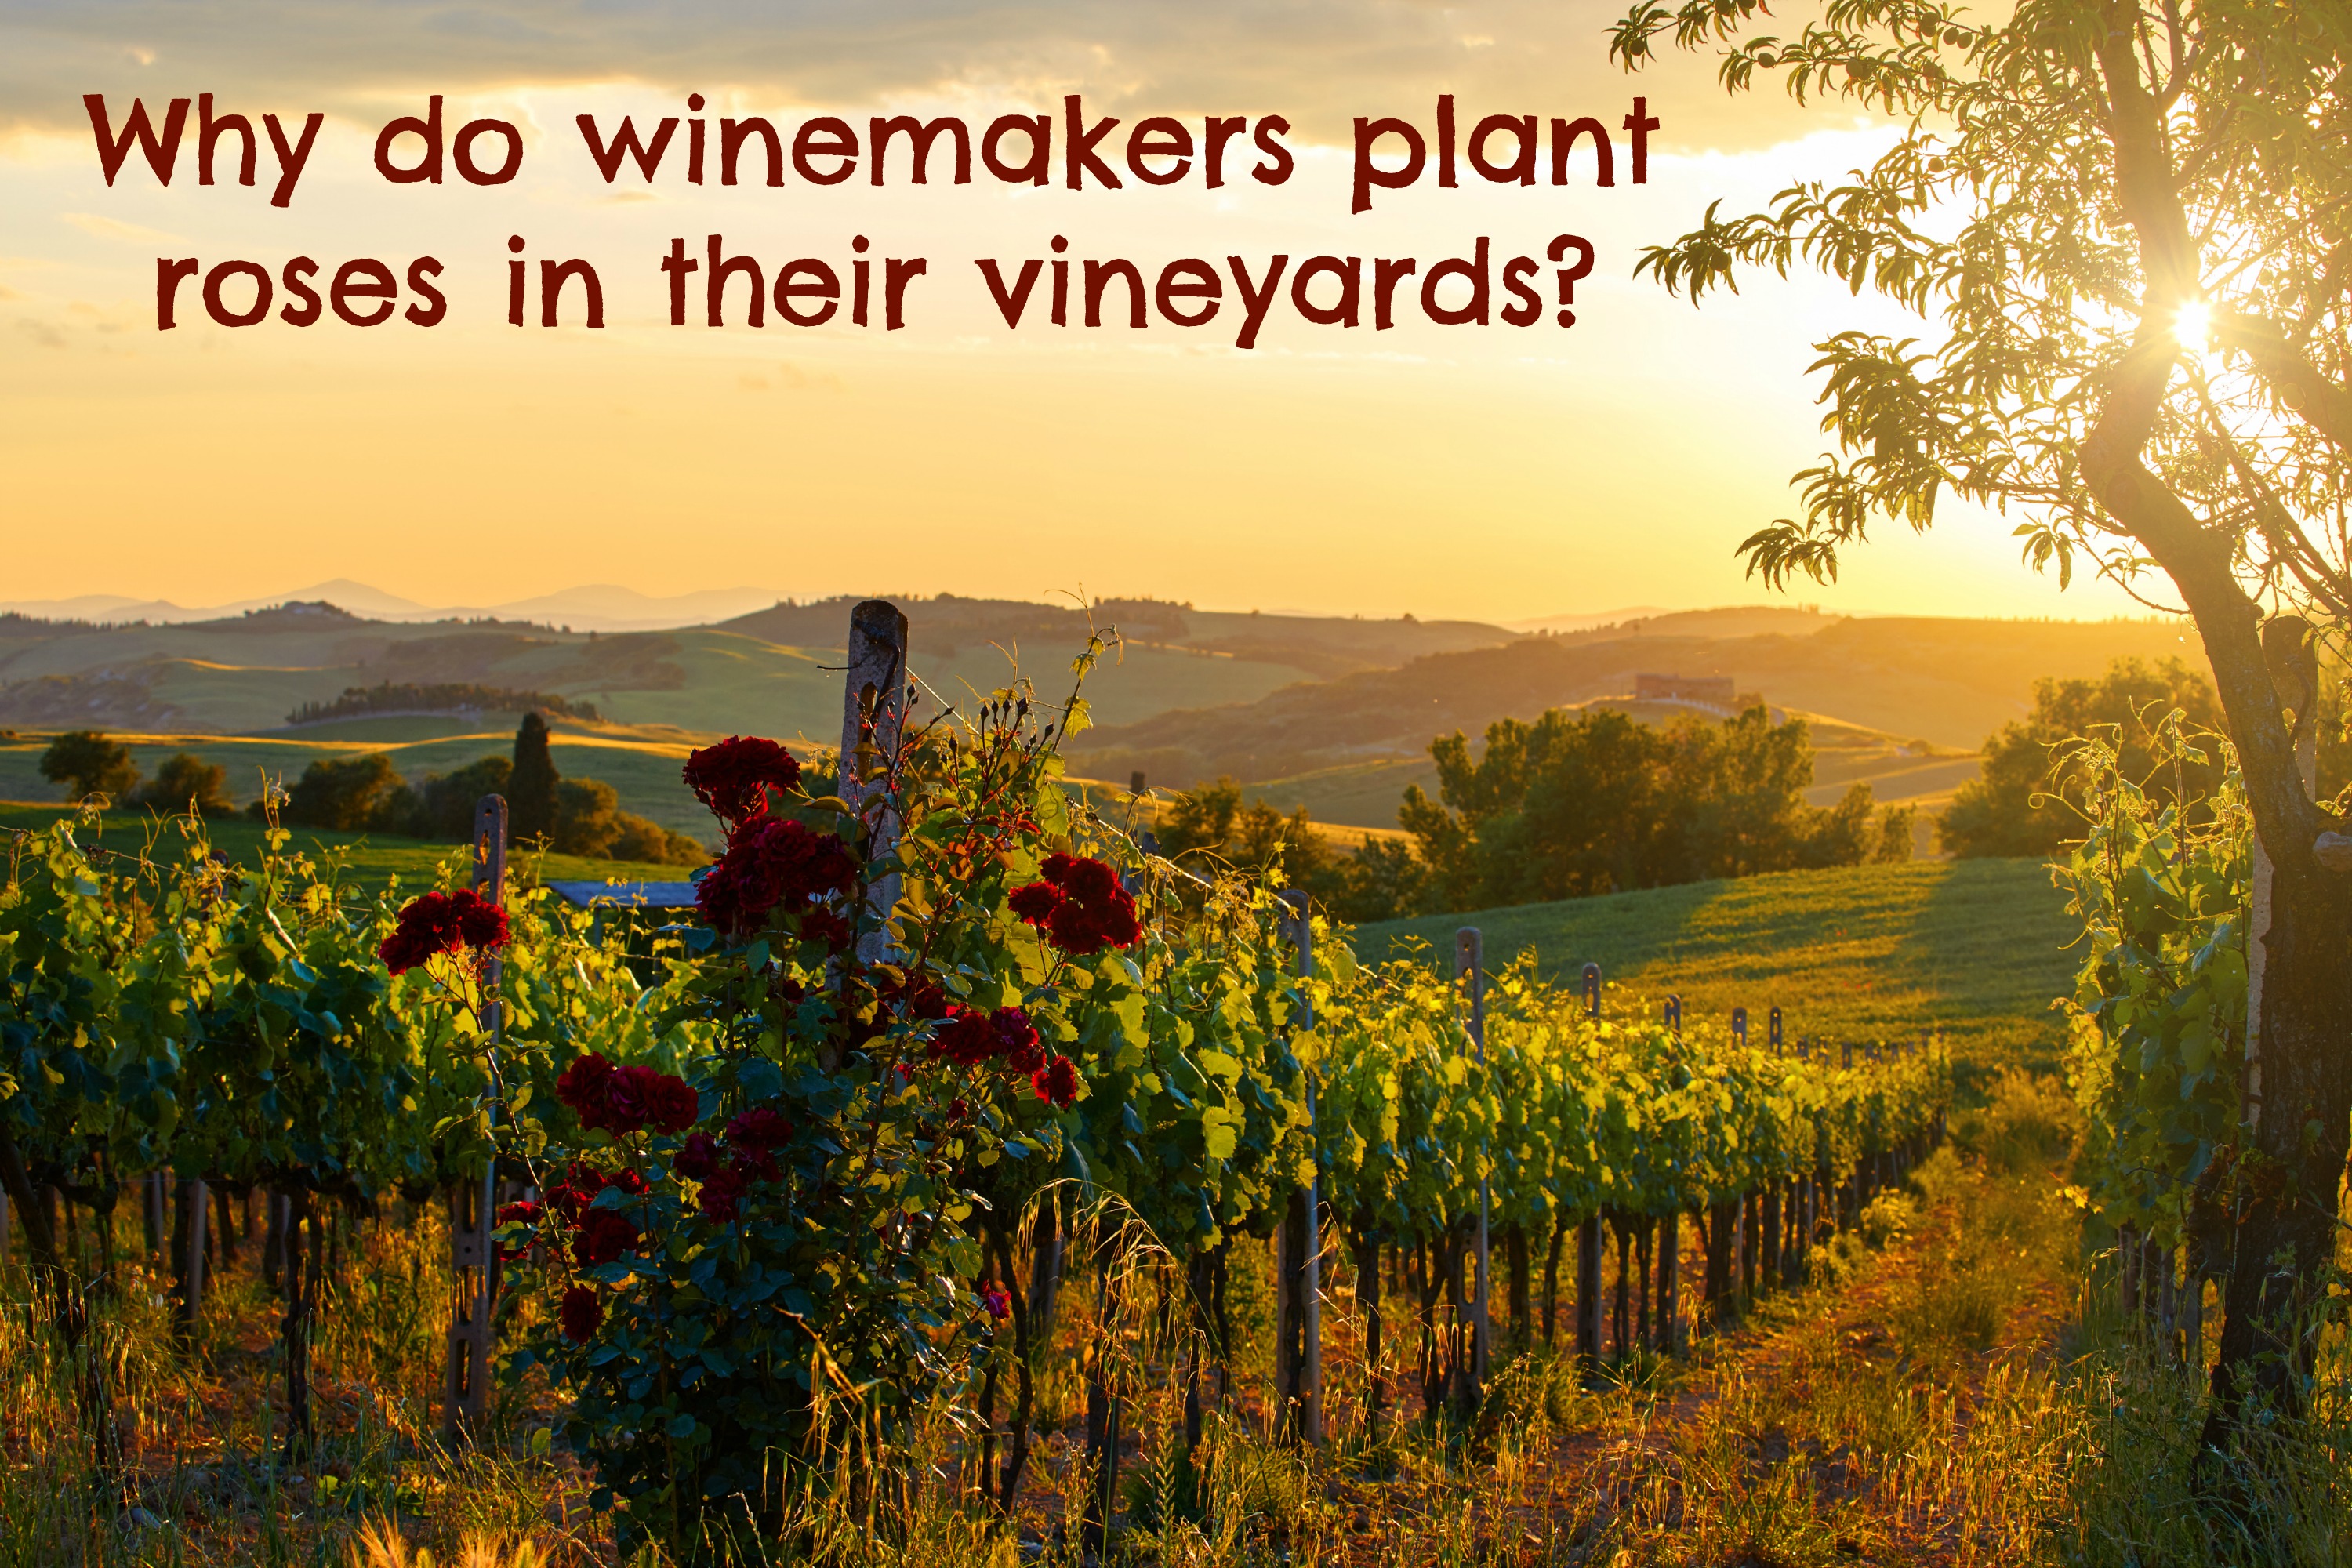 Why do winemakers plant roses in their vineyards?